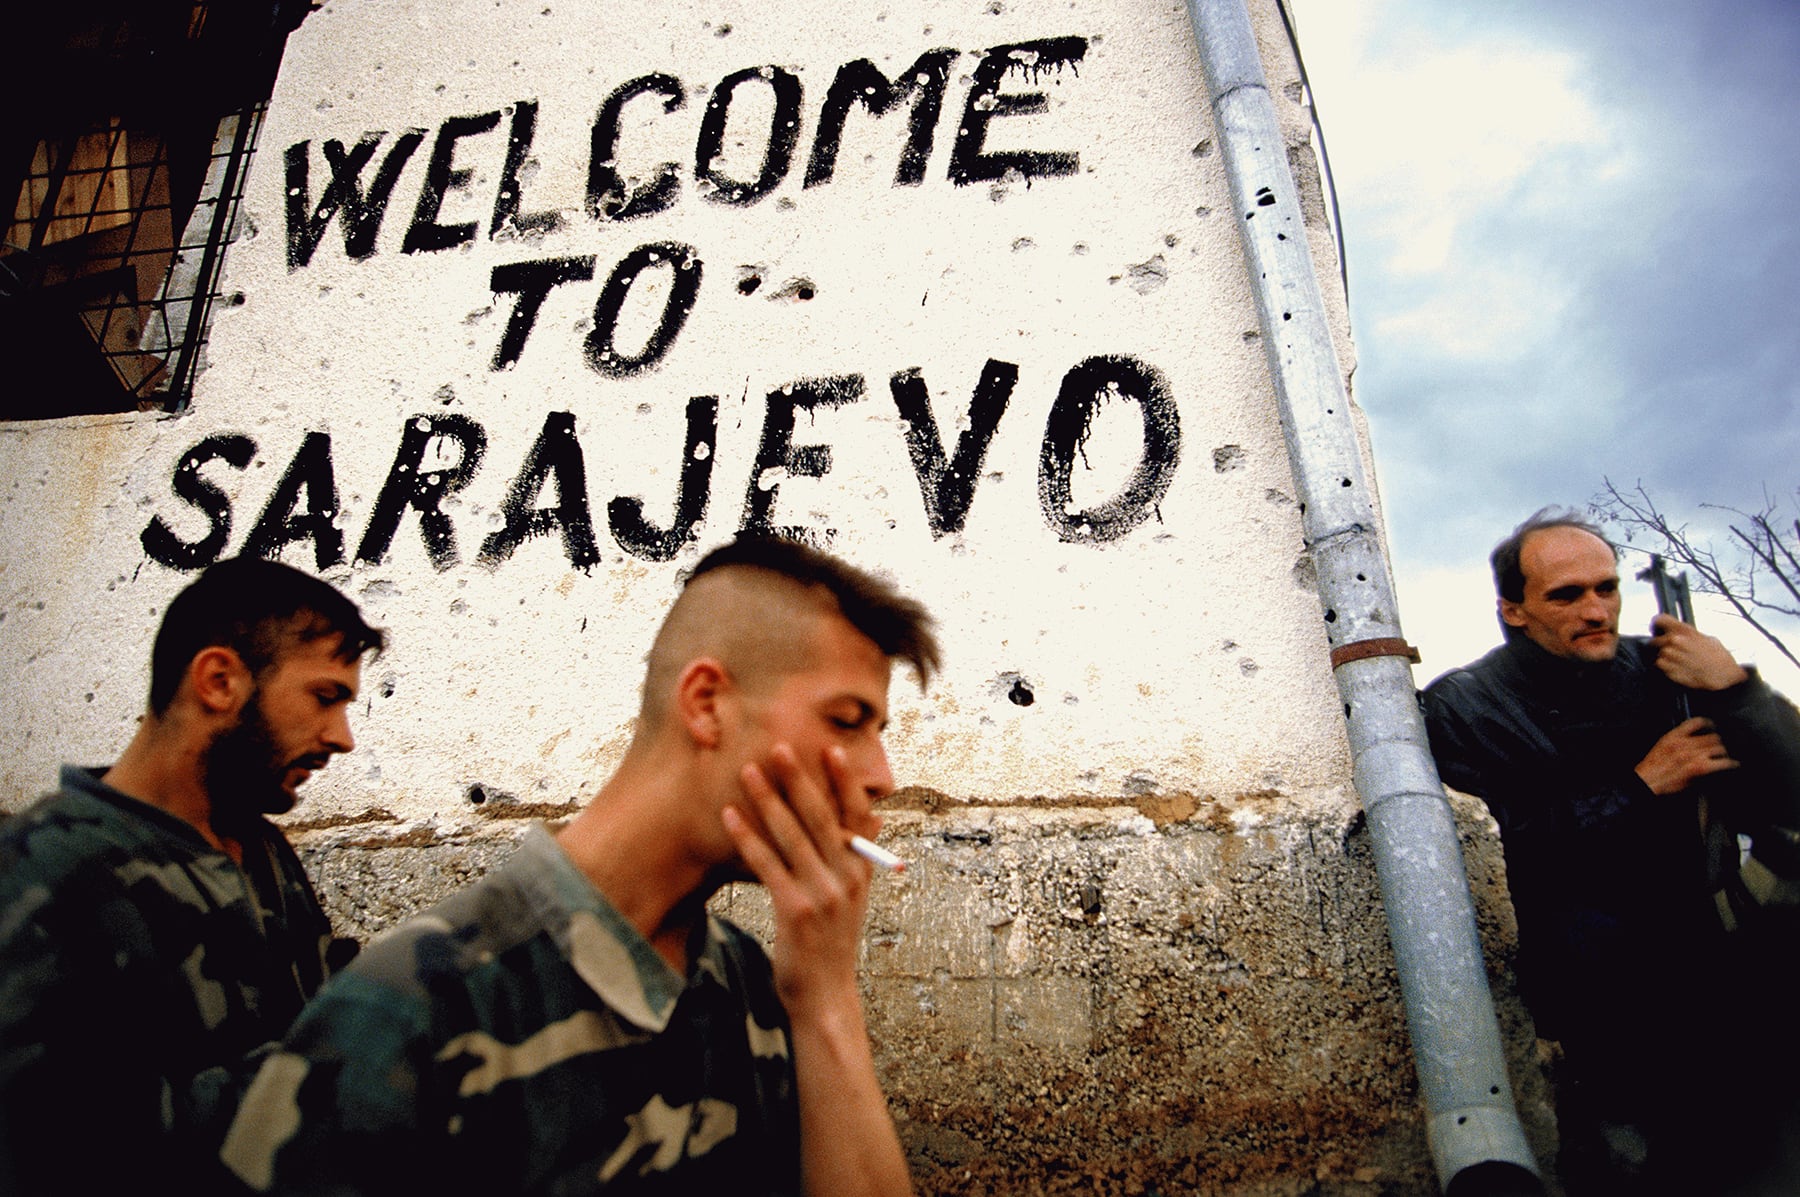 Bosnian soldiers smoke and take a break on the frontline next to a sign that says 'welcome to Sarajevo' in Sarajevo, Bosnia, in the fall of 1994. Trench warfare was fought all around the city of Sarajevo. © Ron Haviv / VII Photo